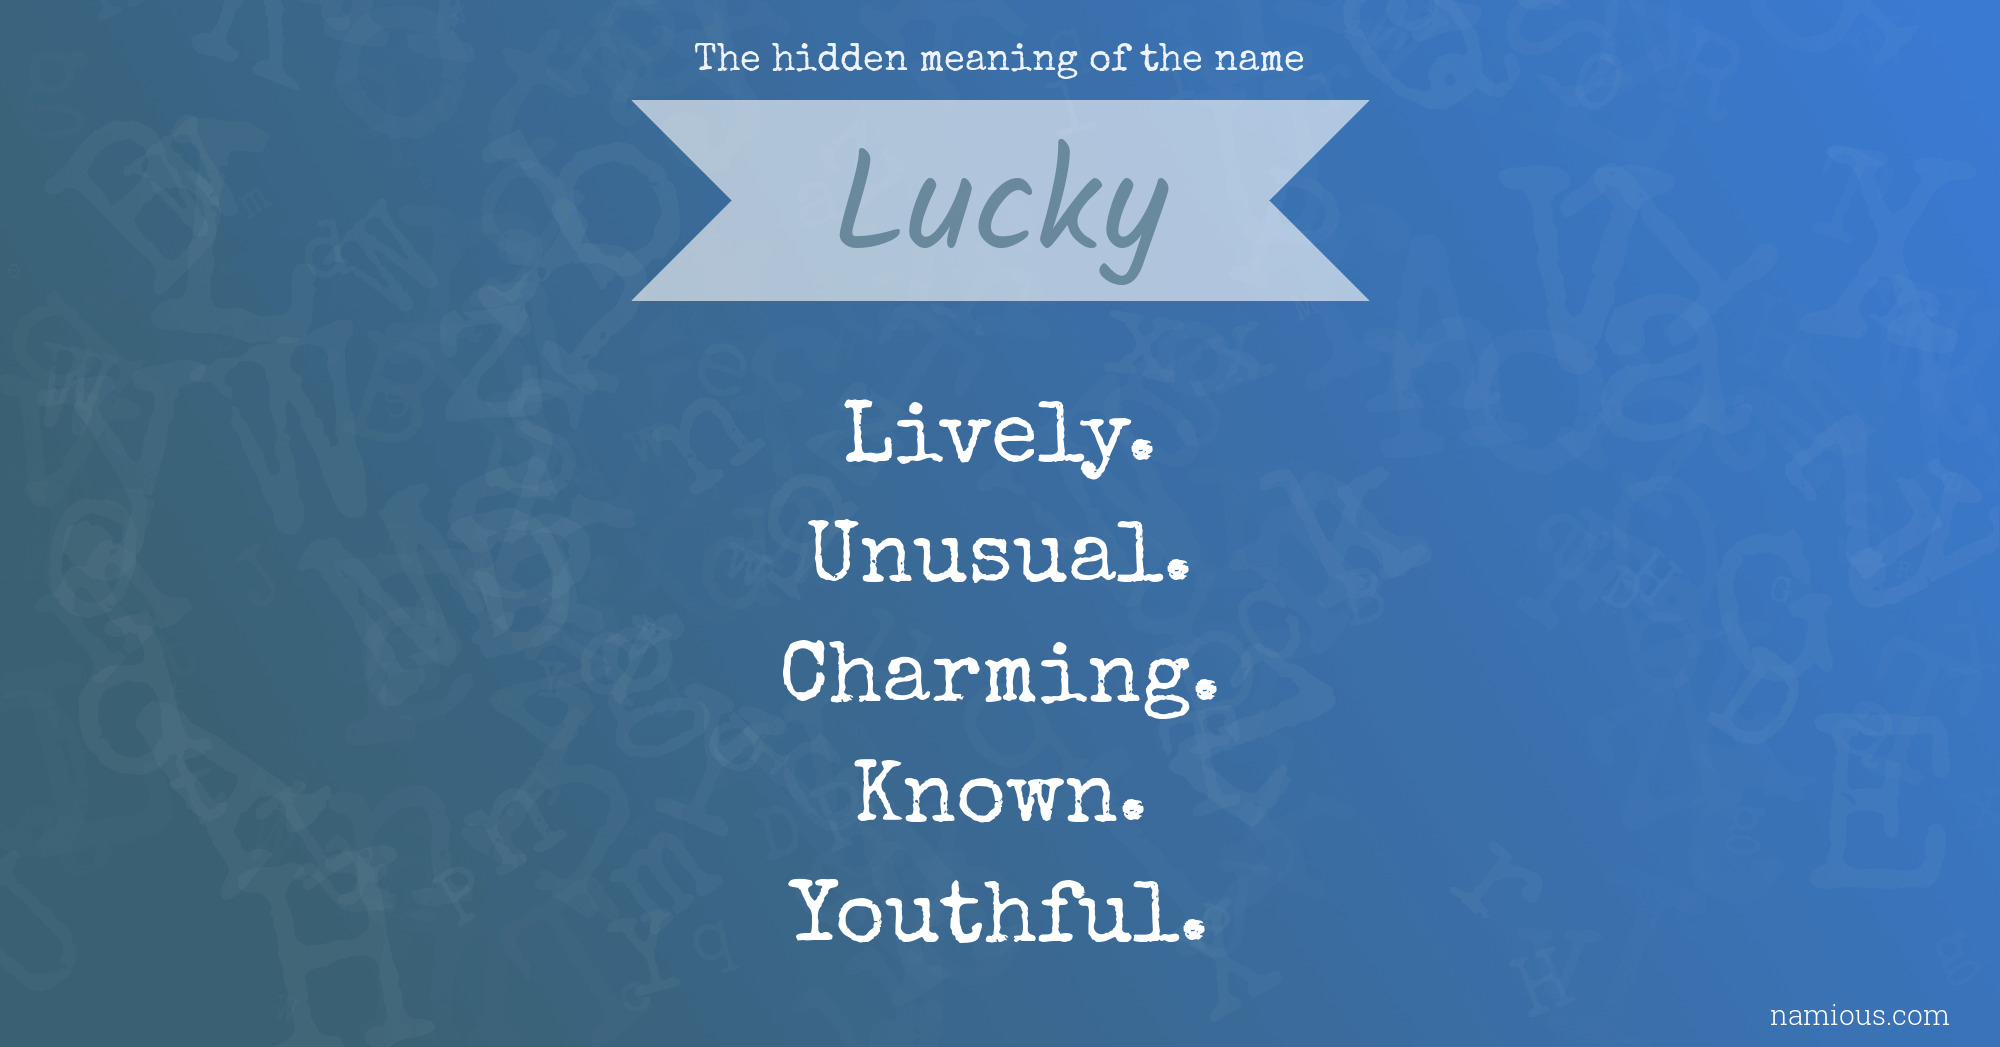 Shawty Name Meaning (Origin, Lucky Number, Gender, Pronounce)